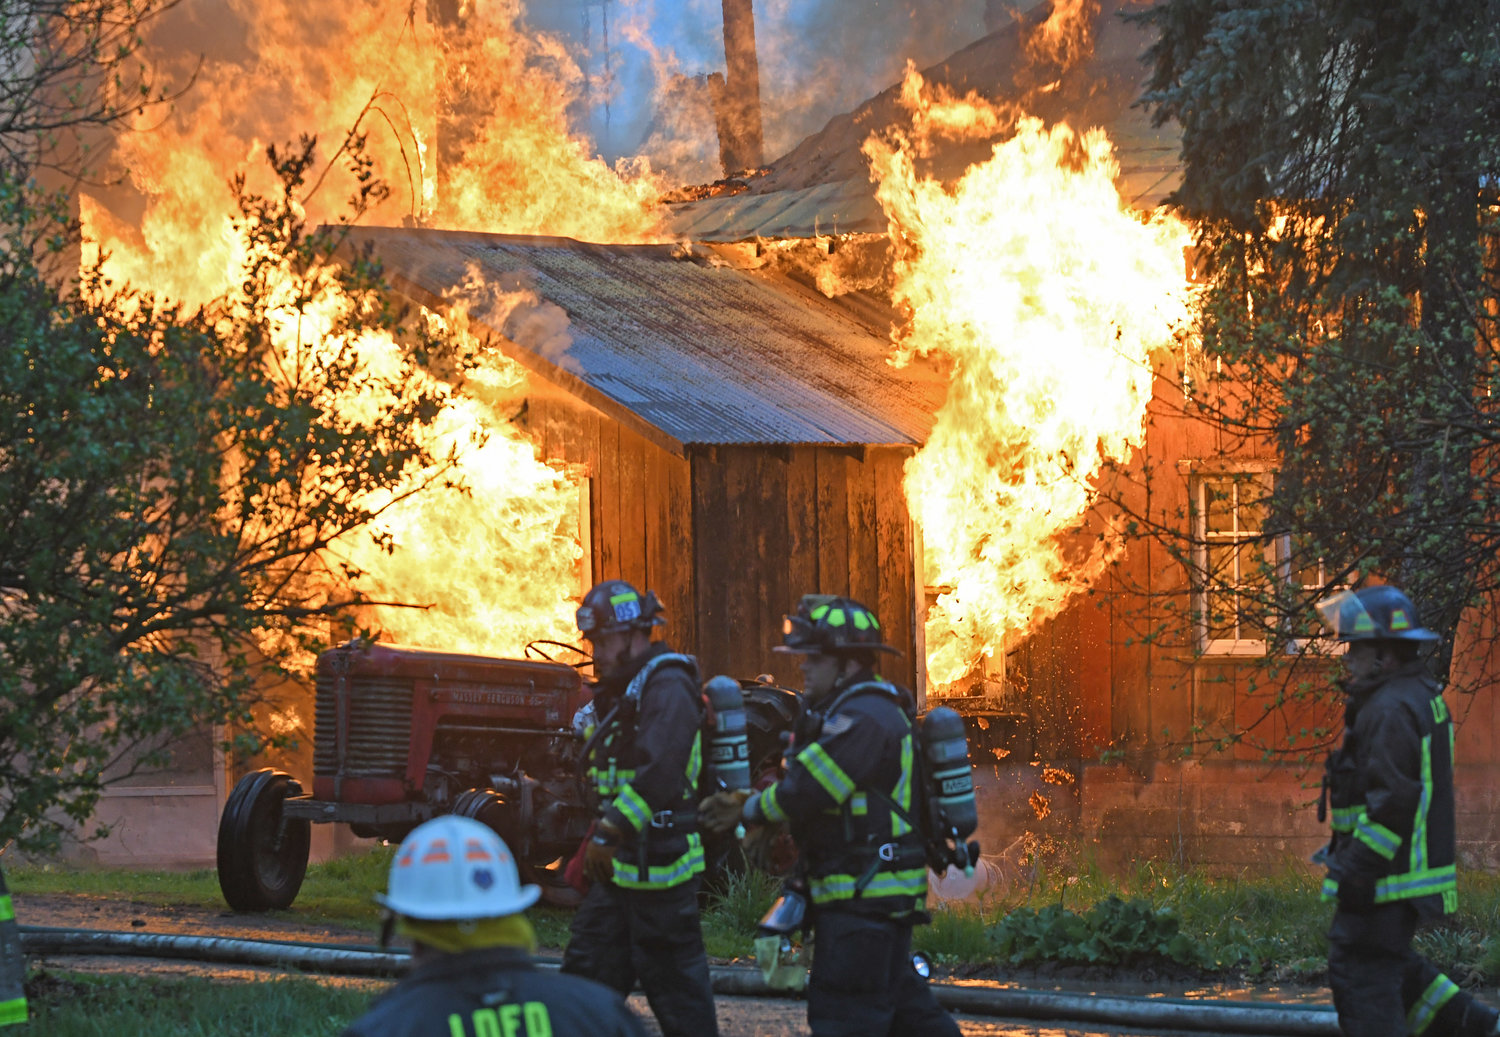 Conflagration consumes Lee Center barns | Daily Sentinel